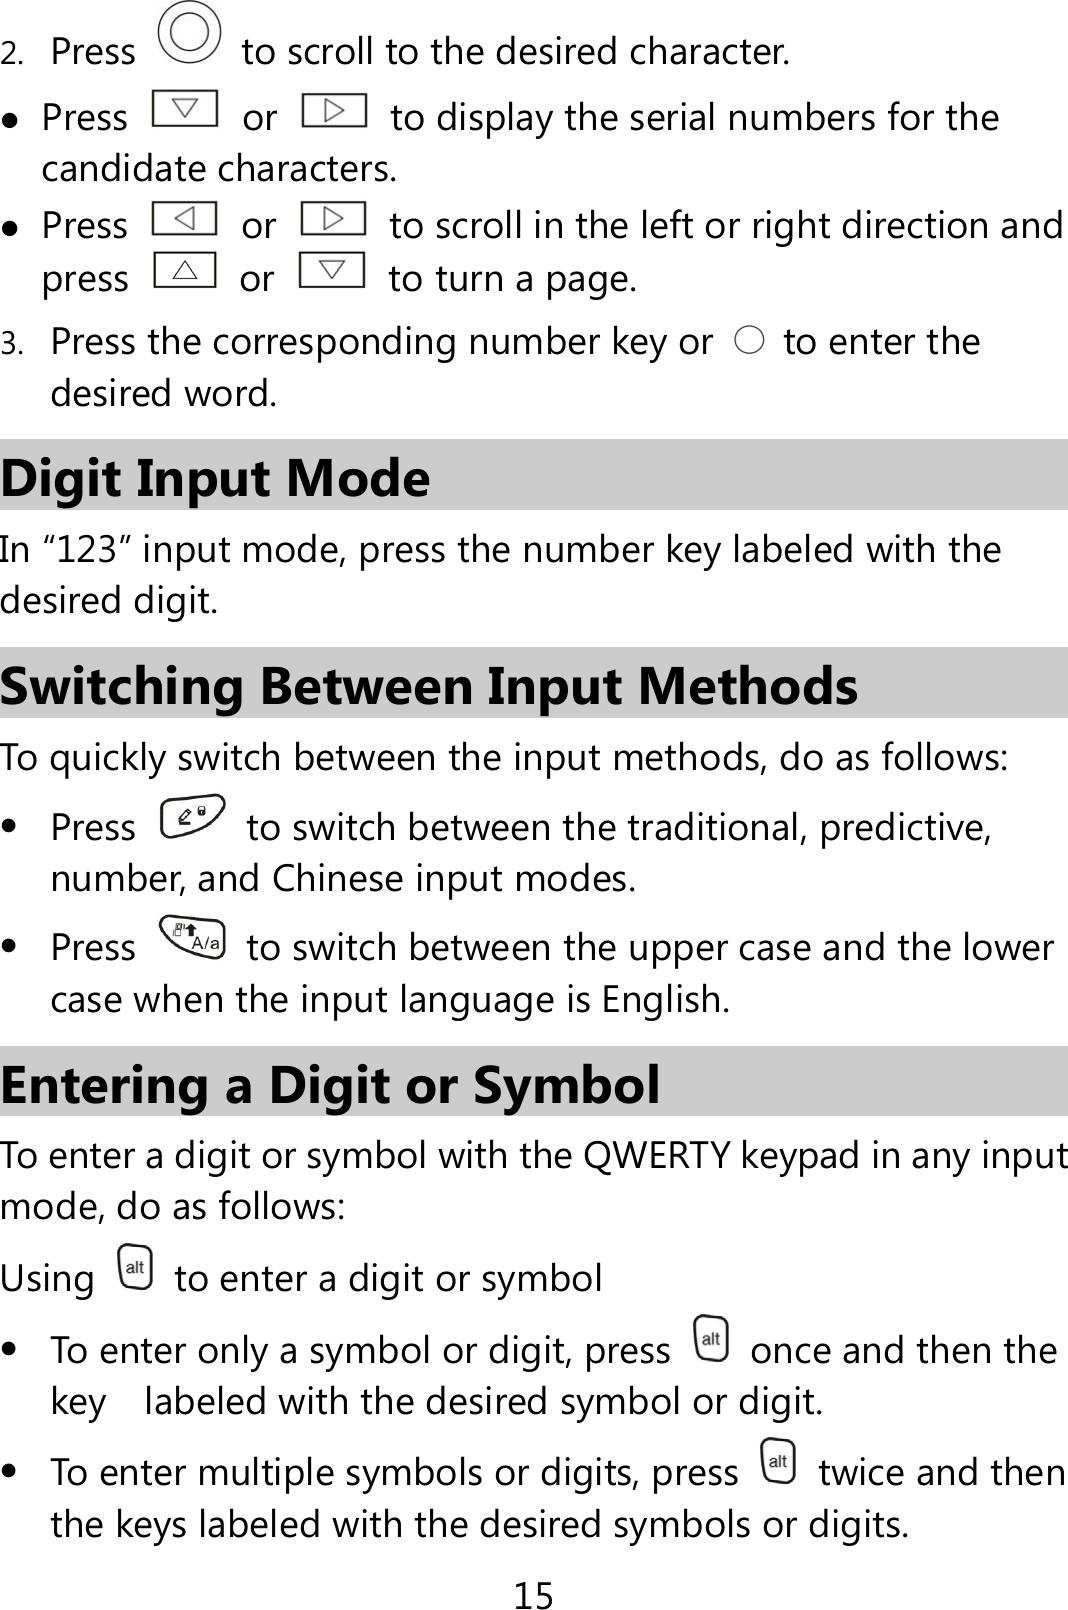 15 2. Press    to scroll to the desired character.  Press   or    to display the serial numbers for the candidate characters.  Press   or    to scroll in the left or right direction and press   or    to turn a page. 3. Press the corresponding number key or    to enter the desired word. Digit Input Mode In “123” input mode, press the number key labeled with the desired digit. Switching Between Input Methods To quickly switch between the input methods, do as follows:    Press    to switch between the traditional, predictive, number, and Chinese input modes.  Press    to switch between the upper case and the lower case when the input language is English. Entering a Digit or Symbol To enter a digit or symbol with the QWERTY keypad in any input mode, do as follows: Using    to enter a digit or symbol  To enter only a symbol or digit, press    once and then the key    labeled with the desired symbol or digit.  To enter multiple symbols or digits, press   twice and then the keys labeled with the desired symbols or digits. 